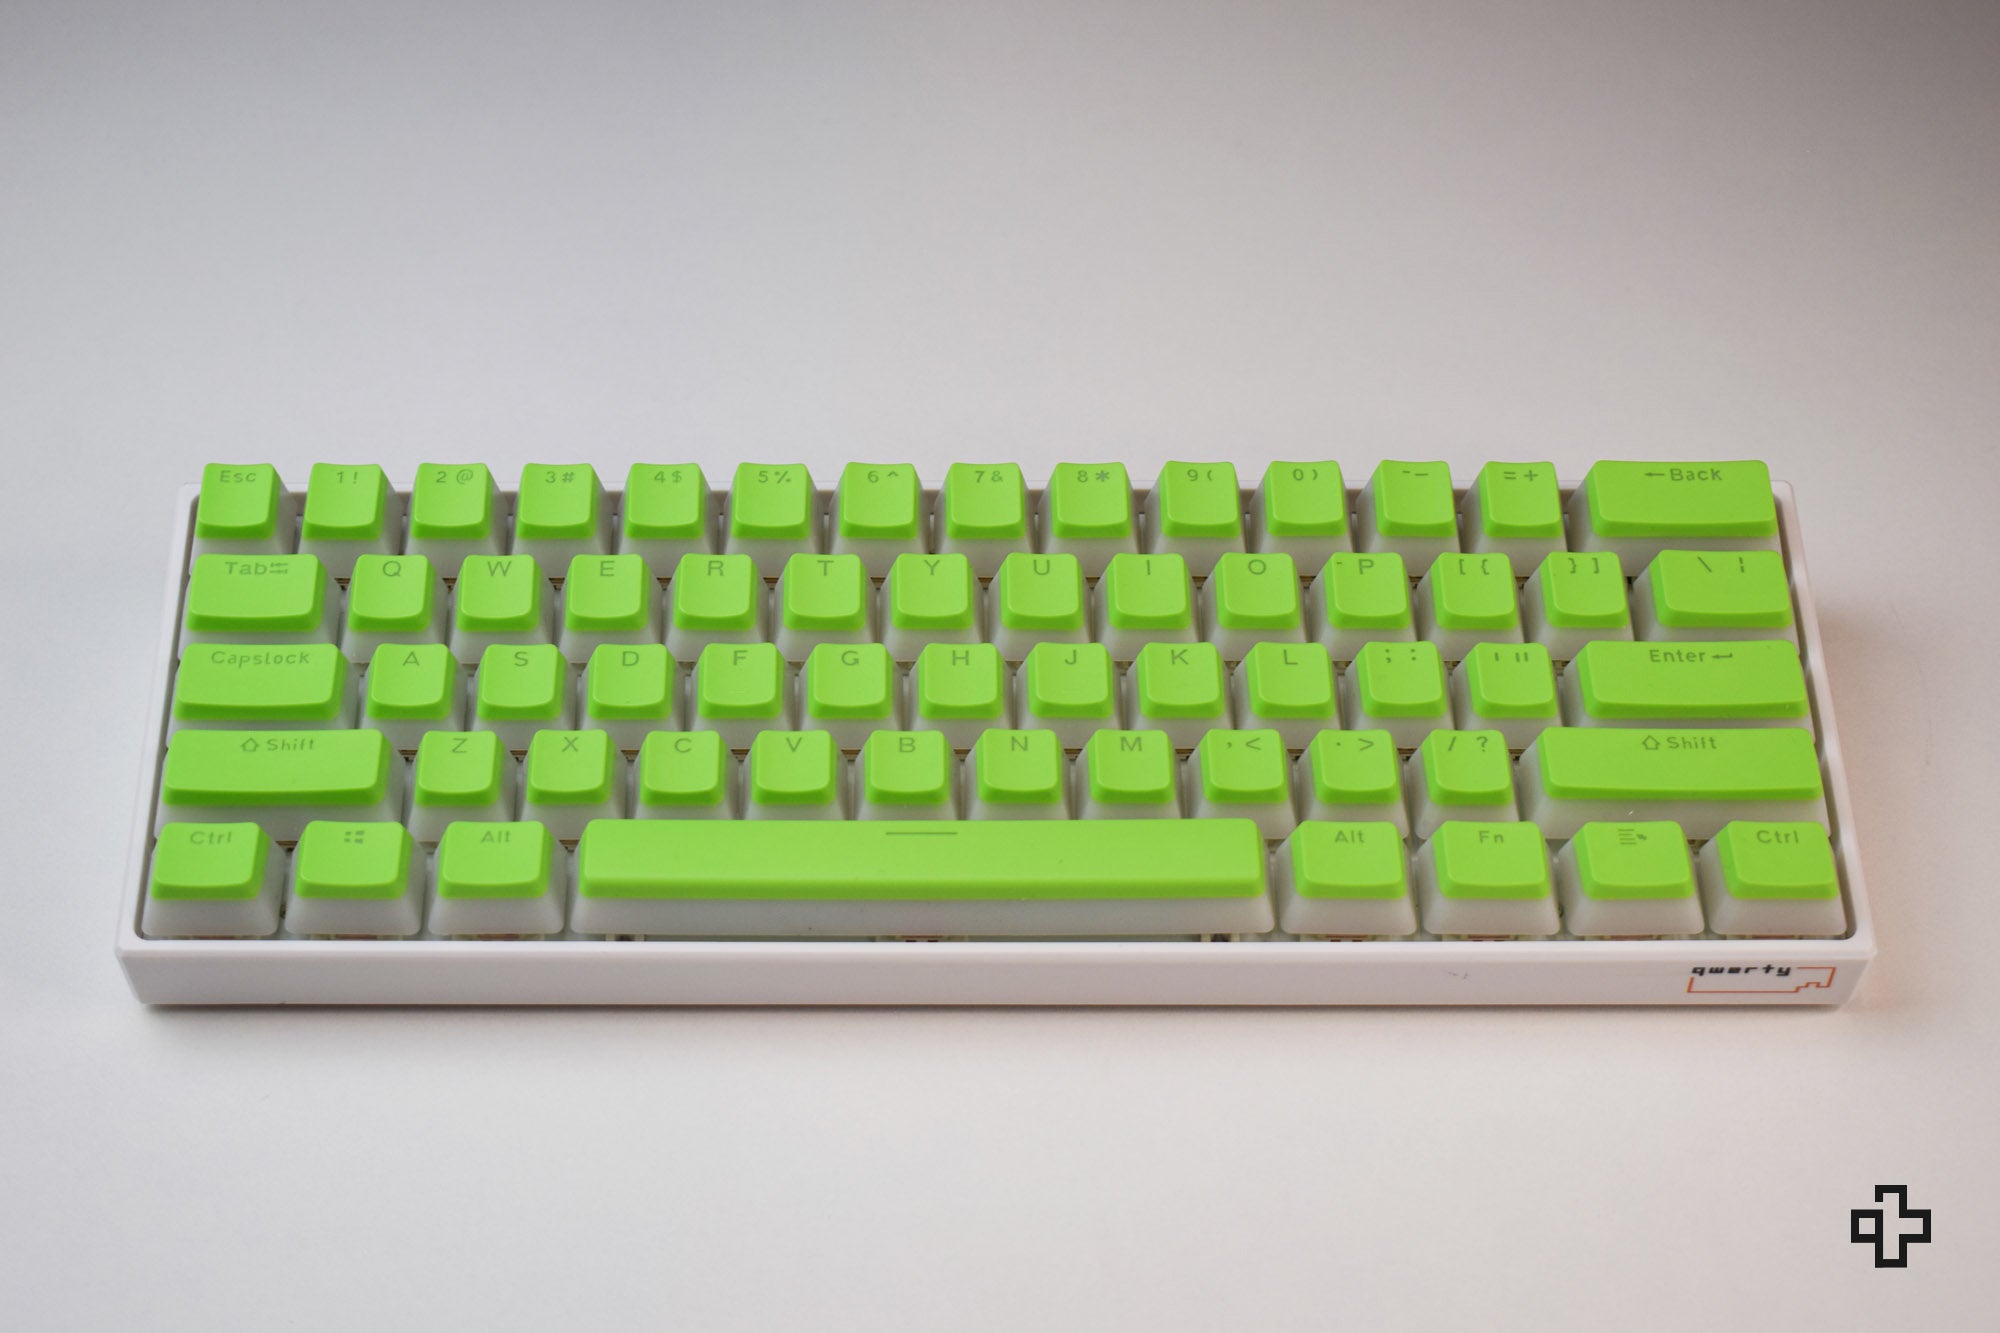 Set Taste Lime Pudding Profil OEM Material PBT Double Shot - QwertyKey